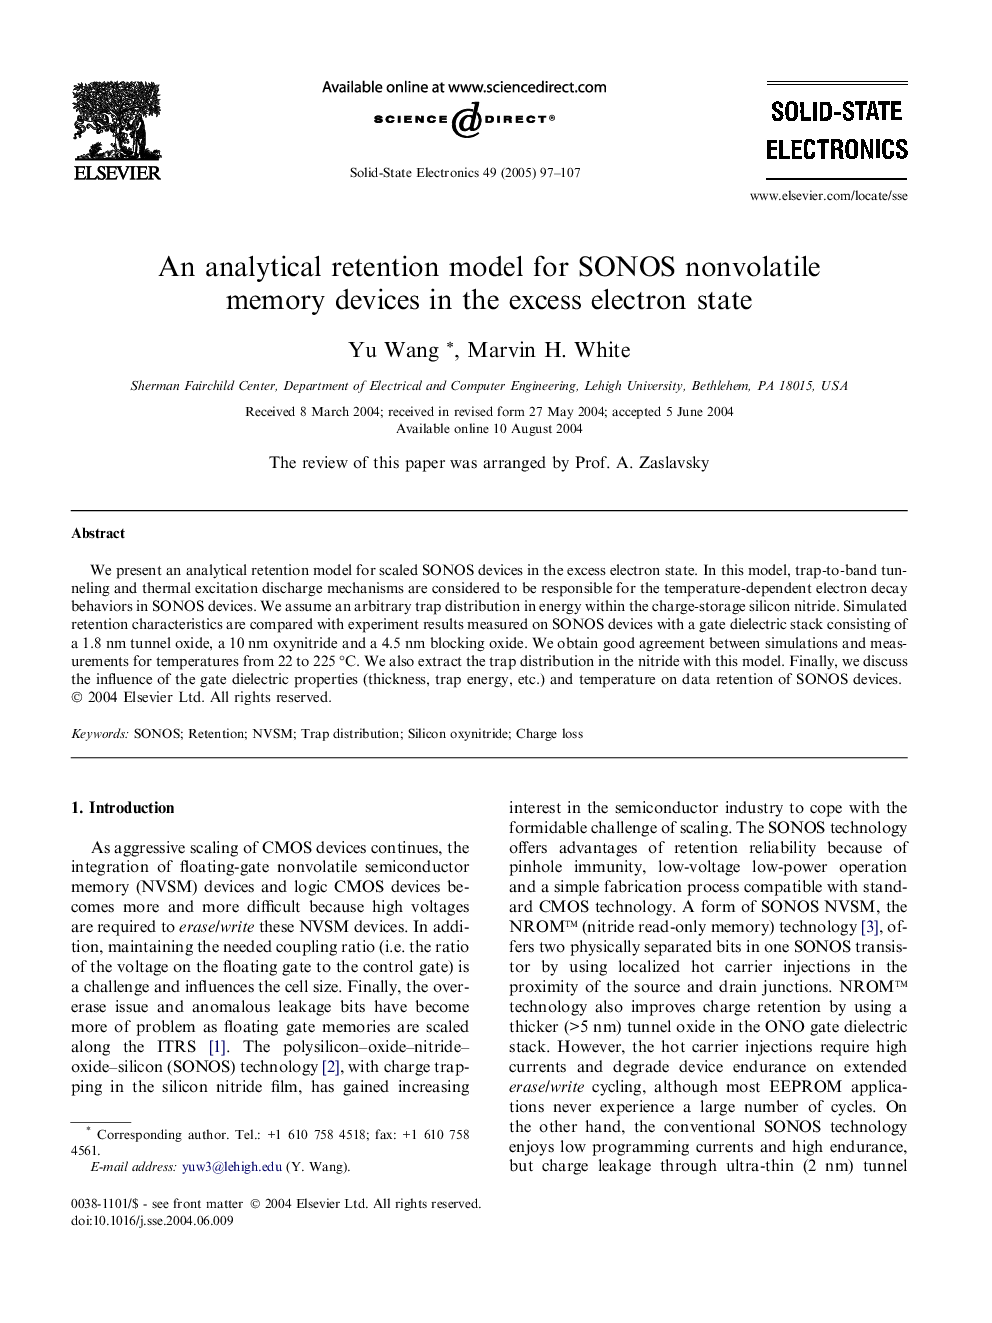 An analytical retention model for SONOS nonvolatile memory devices in the excess electron state